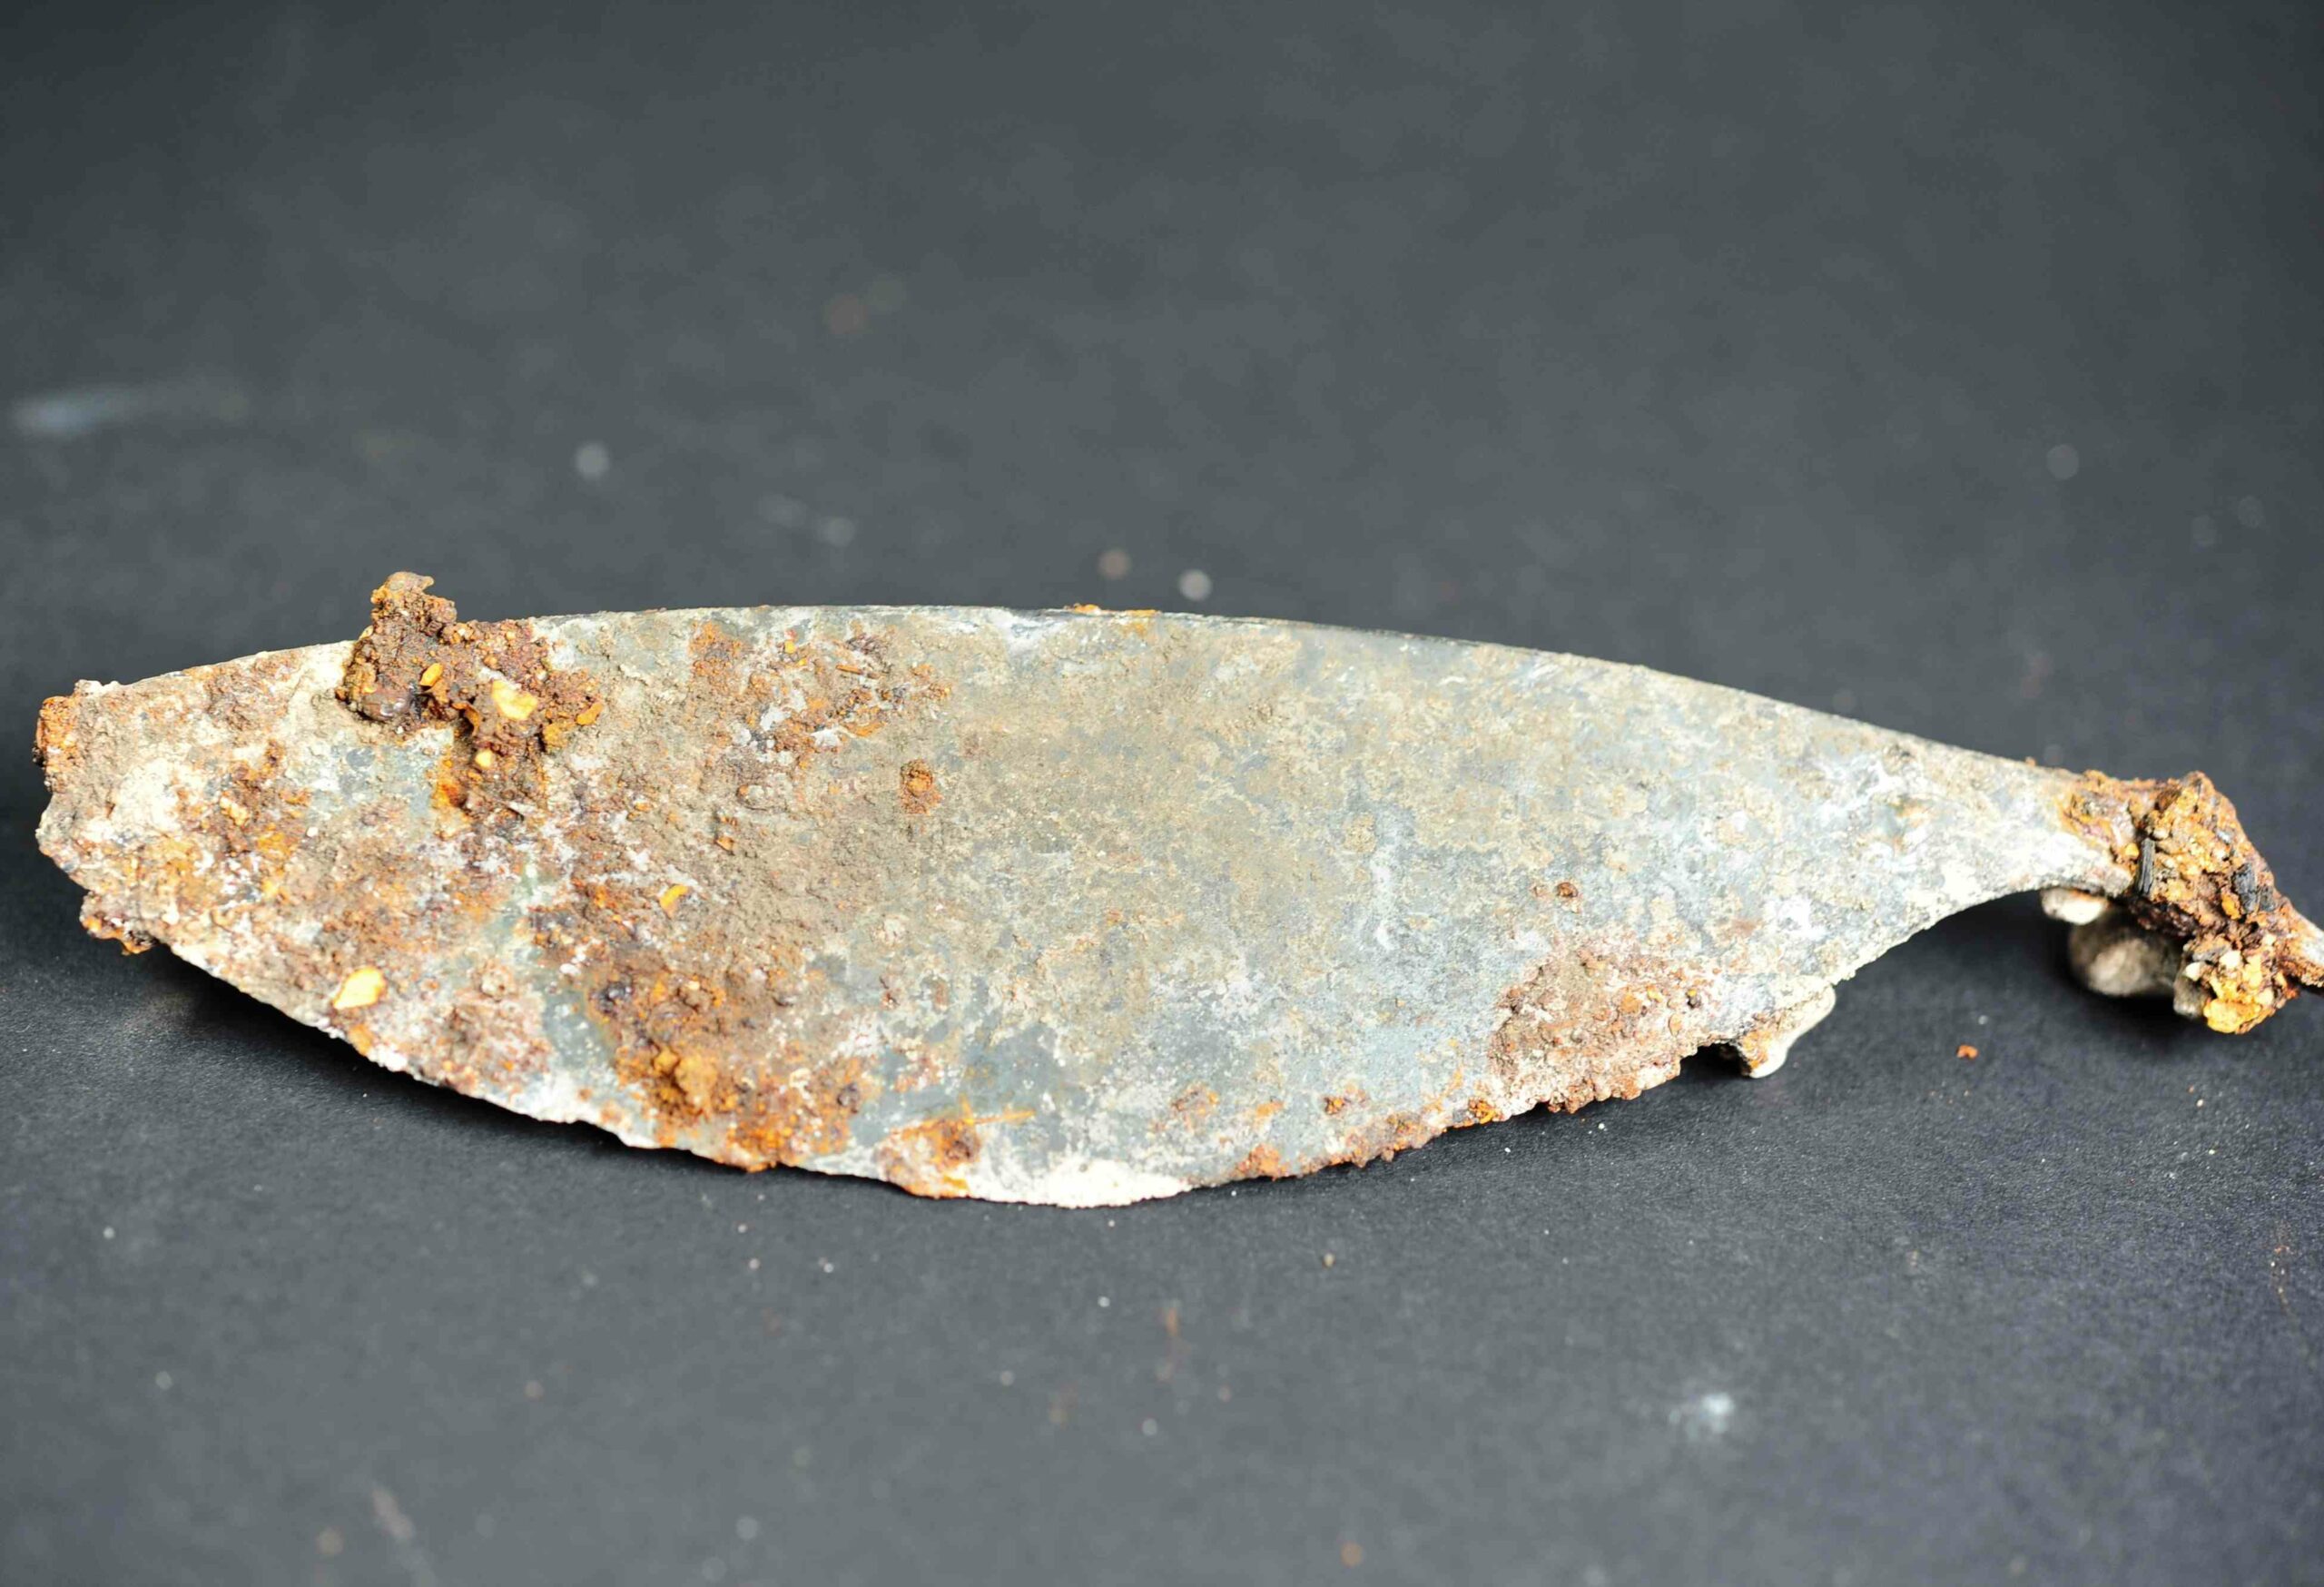 2,300-year-old scissors and a 'folded' sword discovered in a Celtic cremation tomb in Germany 4